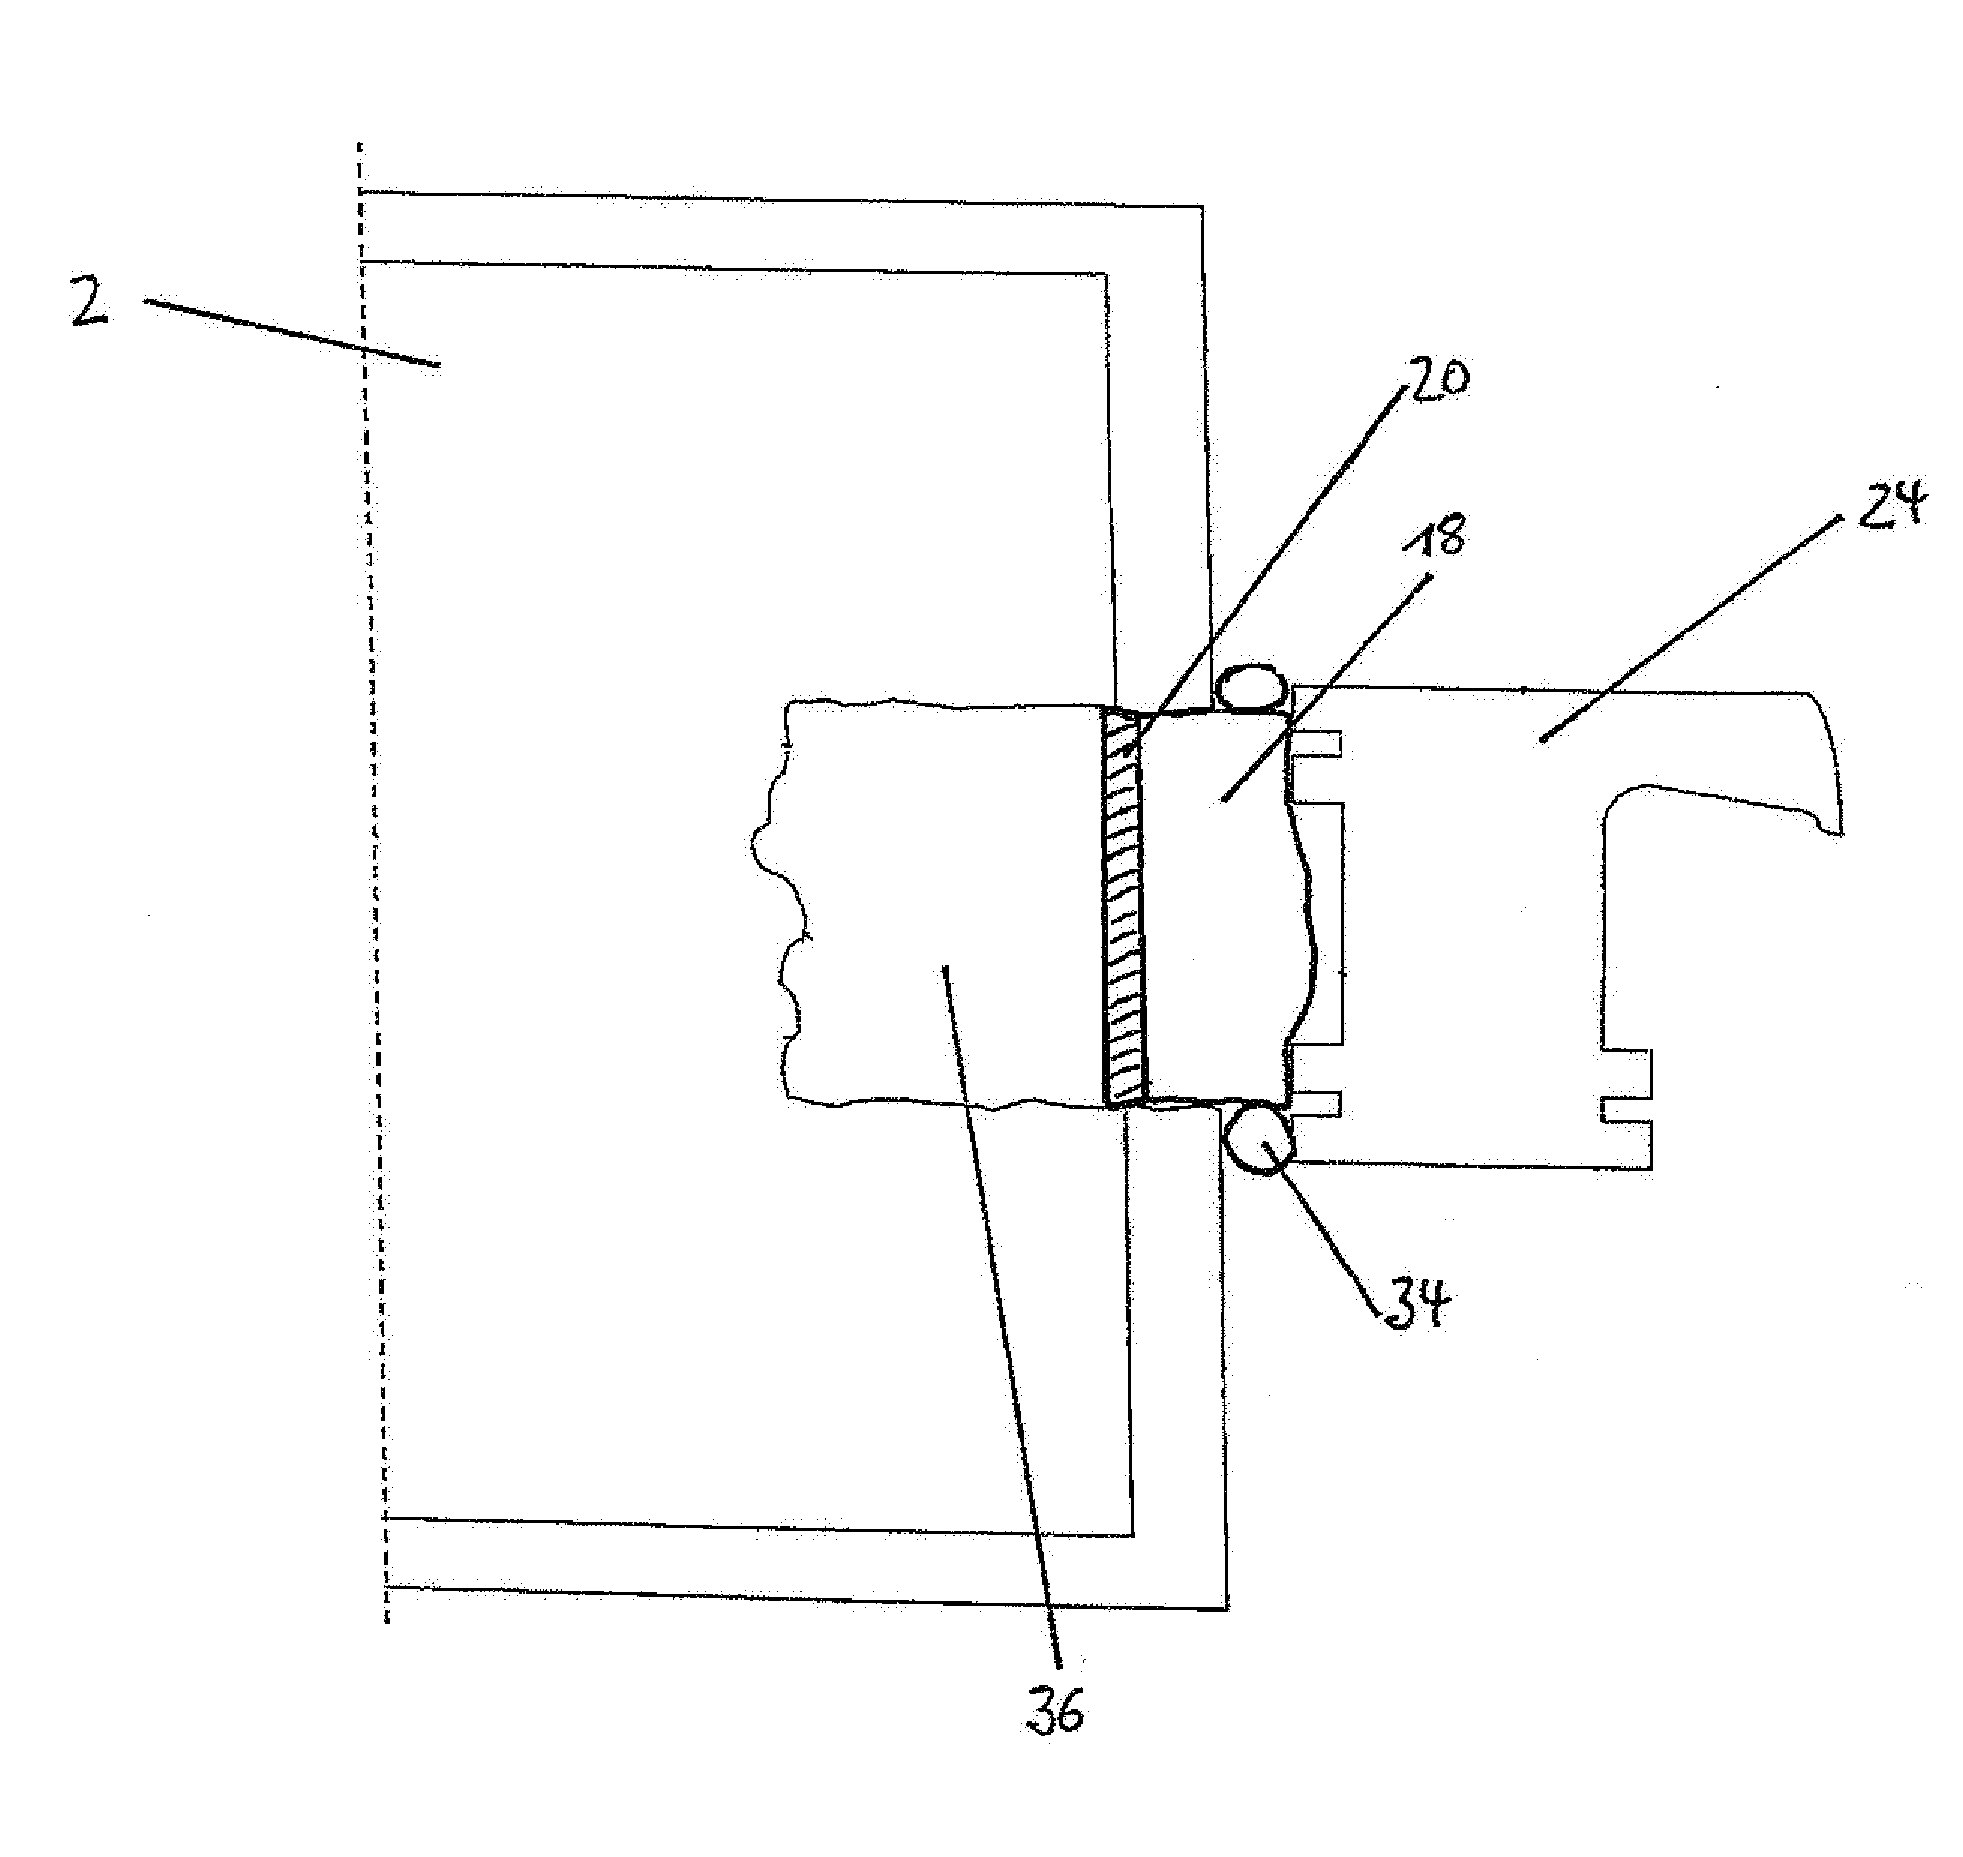 Method for Sealing of Replacement Windows